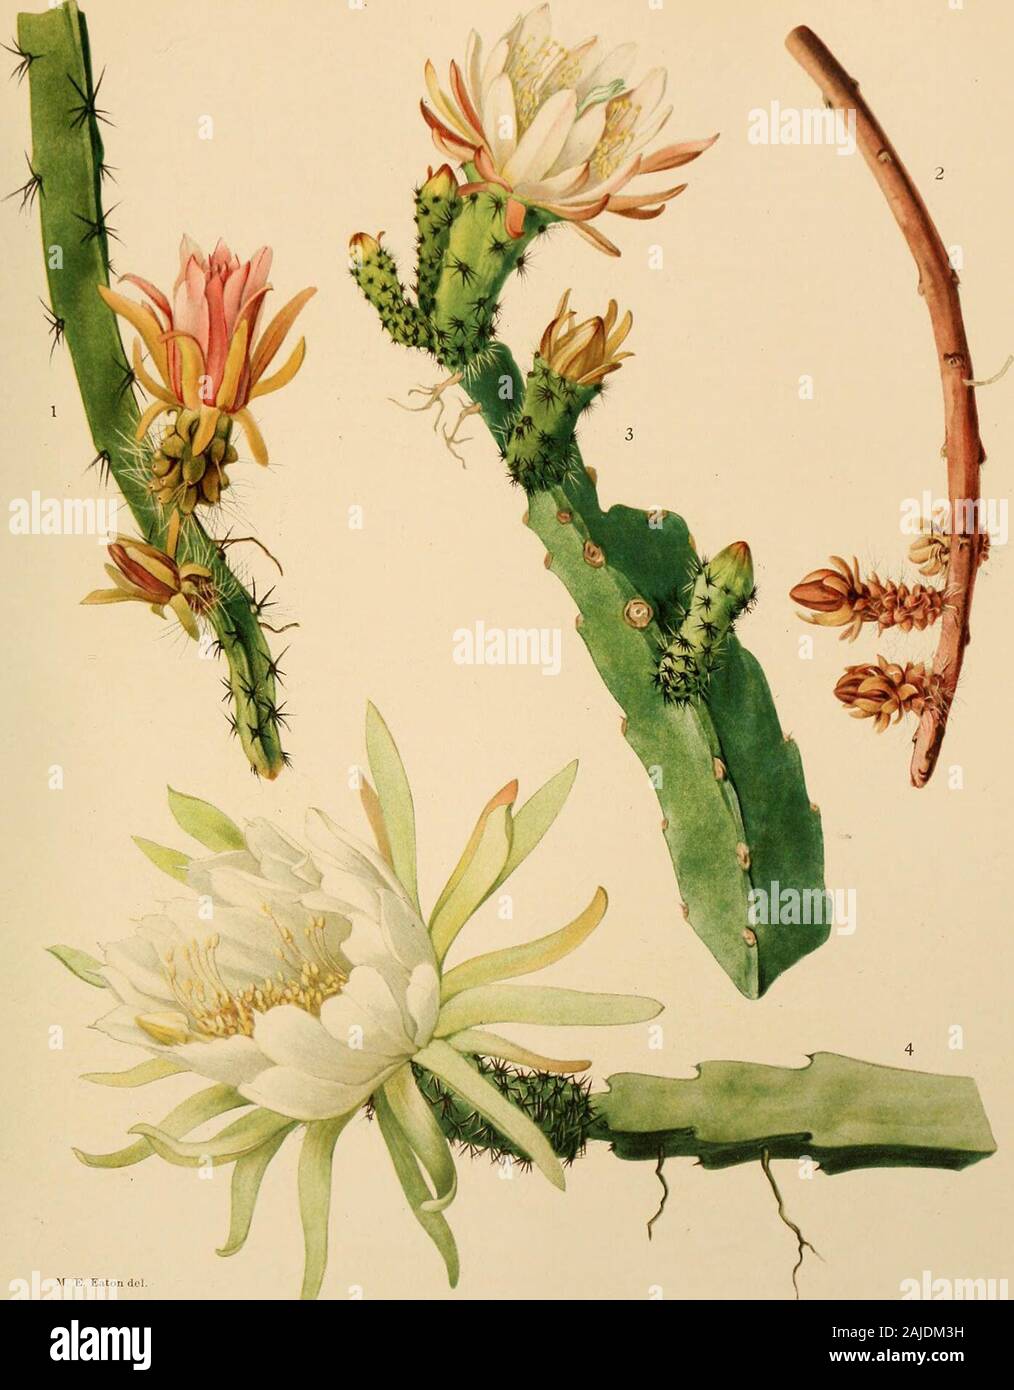 The Cactaceae : descriptions and illustrations of plants of the cactus family . lam, Monatsschr. Kakteenk. 20: 150. 1910.Stems slender, 3-angled, about 2 cm. broad, pale green and slightly glaucous, climbing by aerialroots; margins somewhat knobby, the areole borne on the upper part of the knob, small, 3 to 4 cm.apart; spines 2 to 4, short, 1 to 3 mm. long, acieular, but with swollen bases; flower 10 cm. long ormore, the ovary and tube bearing clusters of yellow to brown acieular spines; inner perianth-segmentswhite, oblanceolate, acute, somewhat serrate; style pale yellow, weak, resting on th Stock Photo